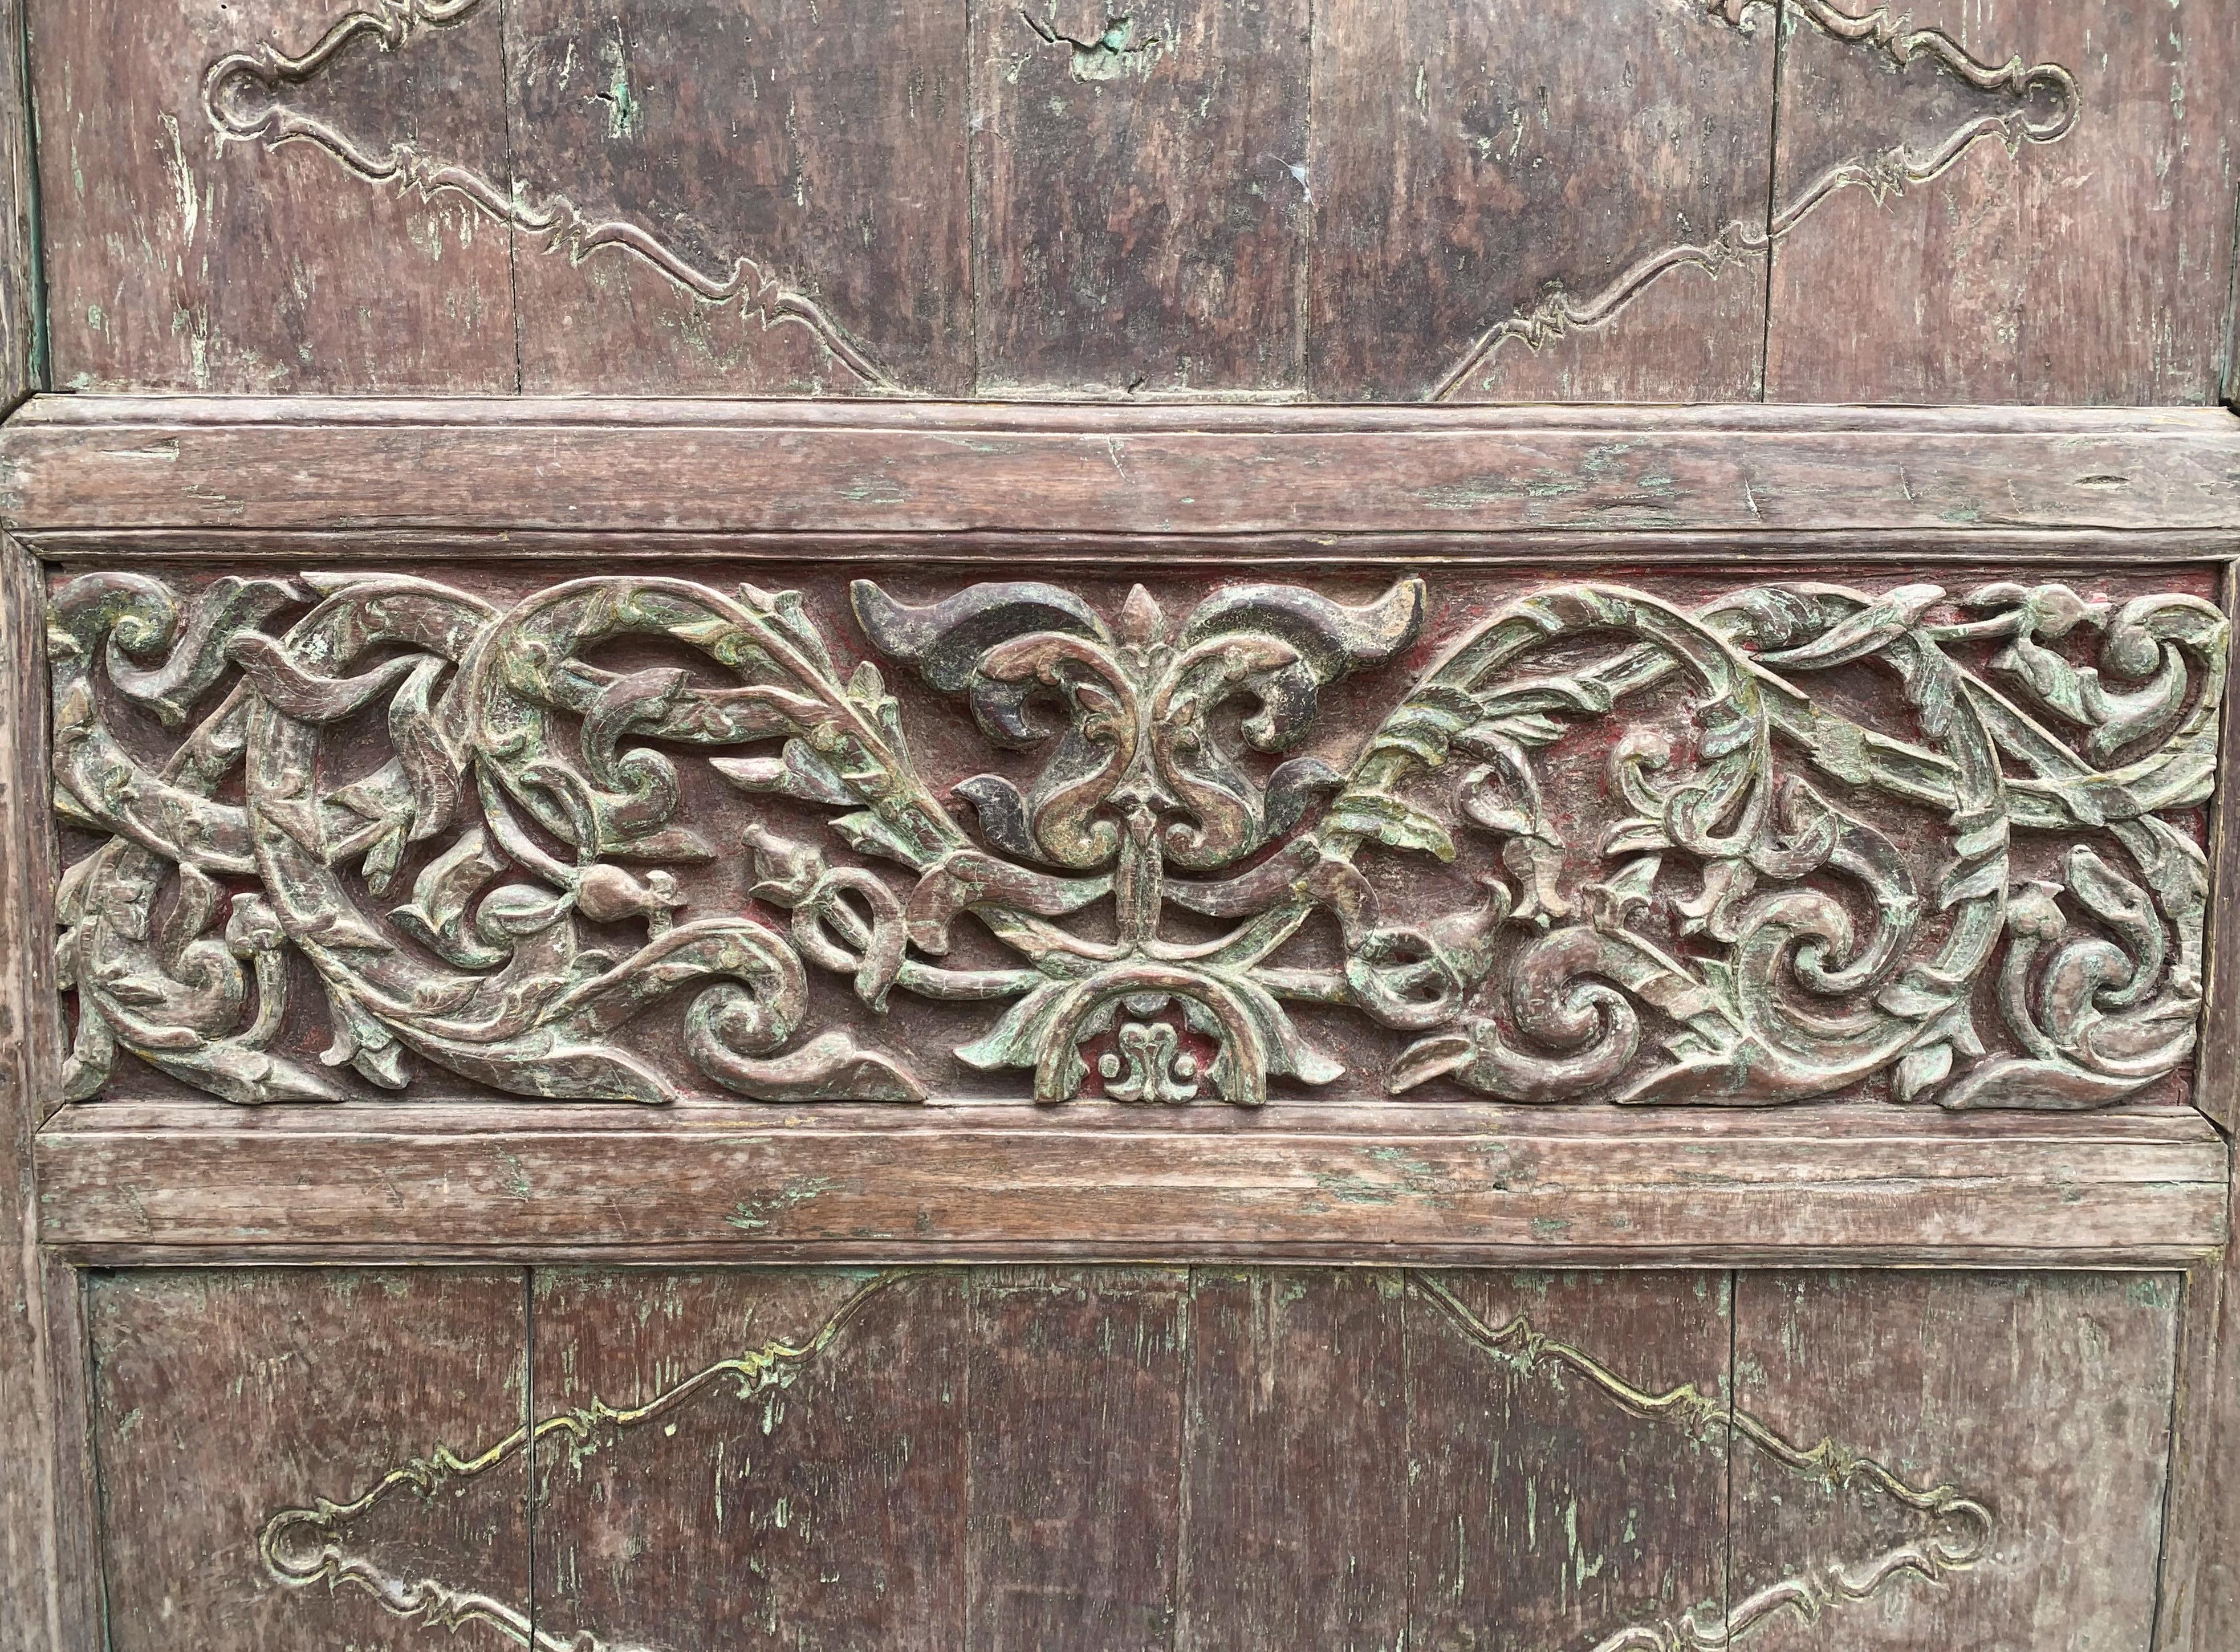 A wonderfully hand-carved wooden panel with floral motifs from the Indonesian island of Madura, off the coast of eastern Java. This decorative panel once adorned a traditional Madura house. Carved from teak wood the panel still retains its original